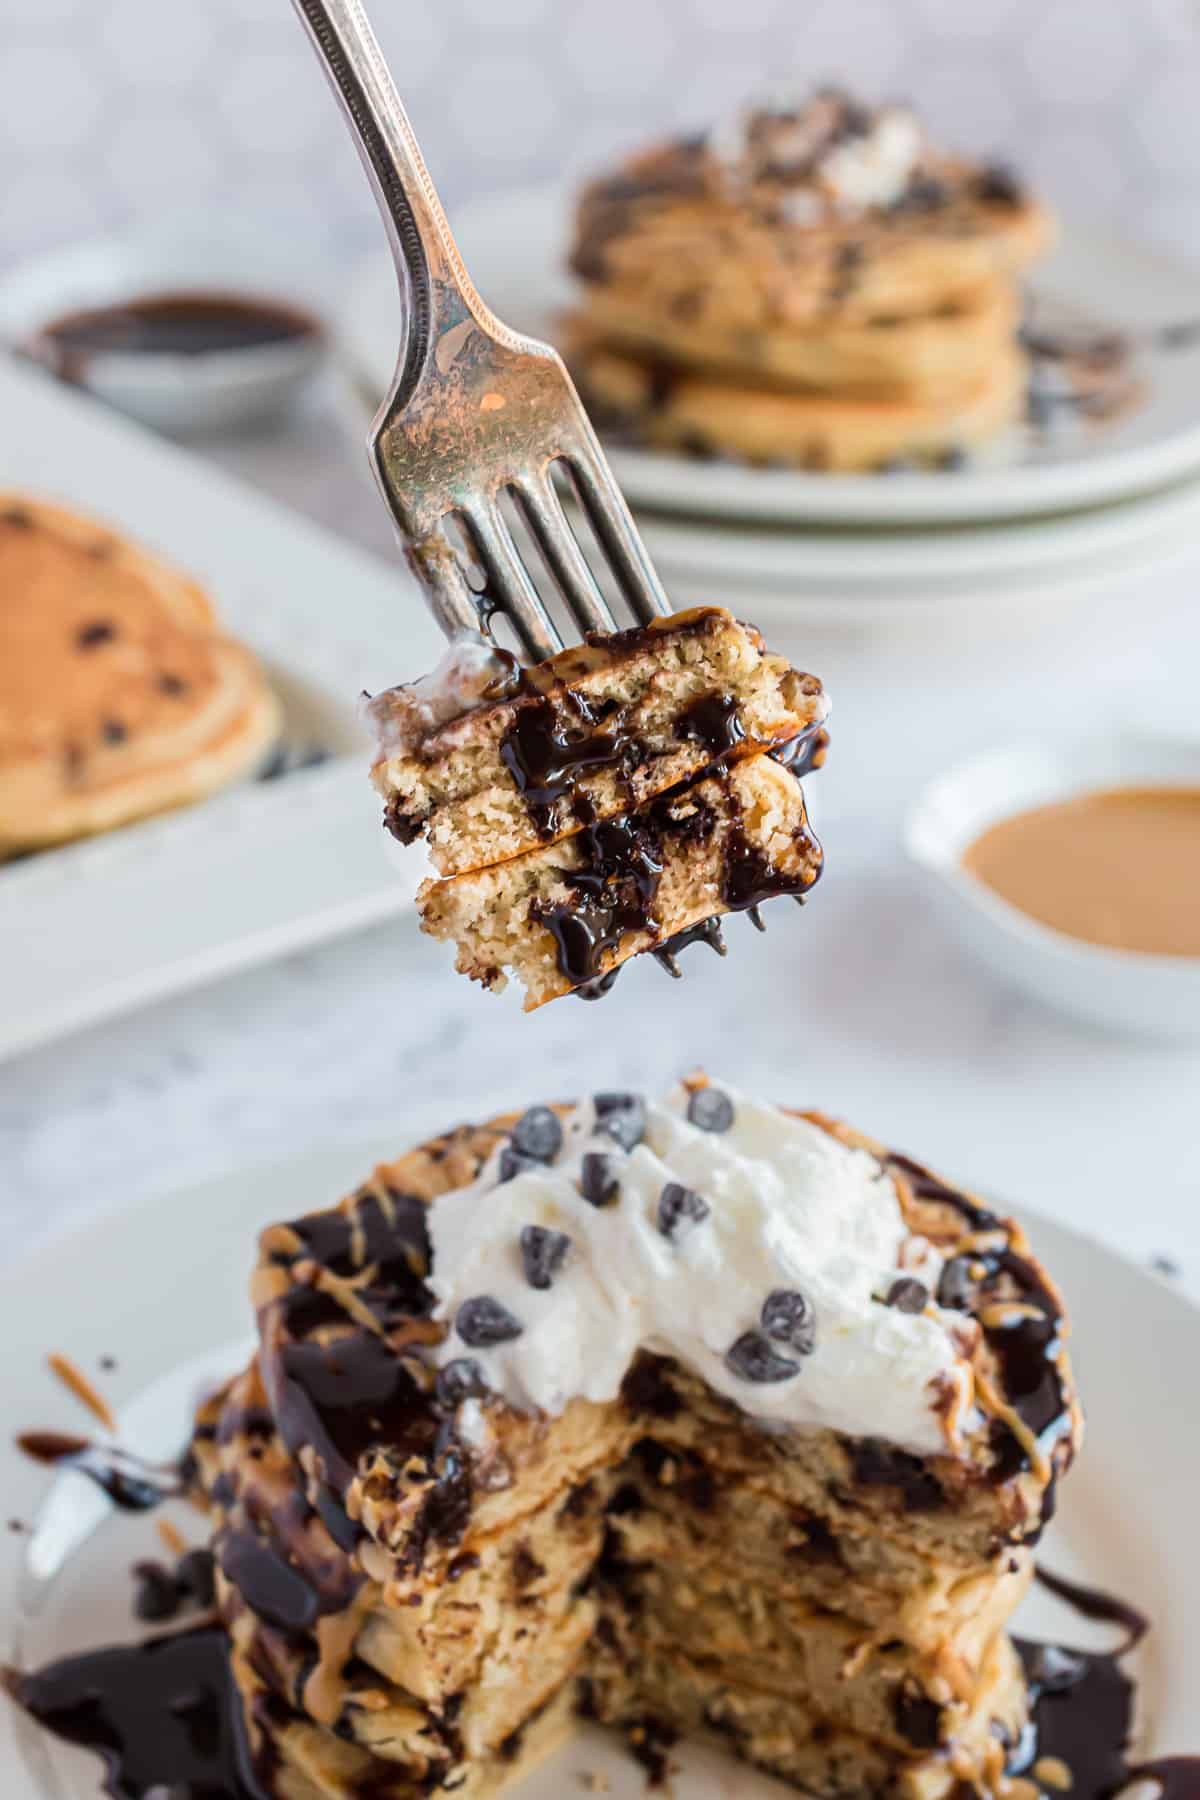 Pancakes on a fork.